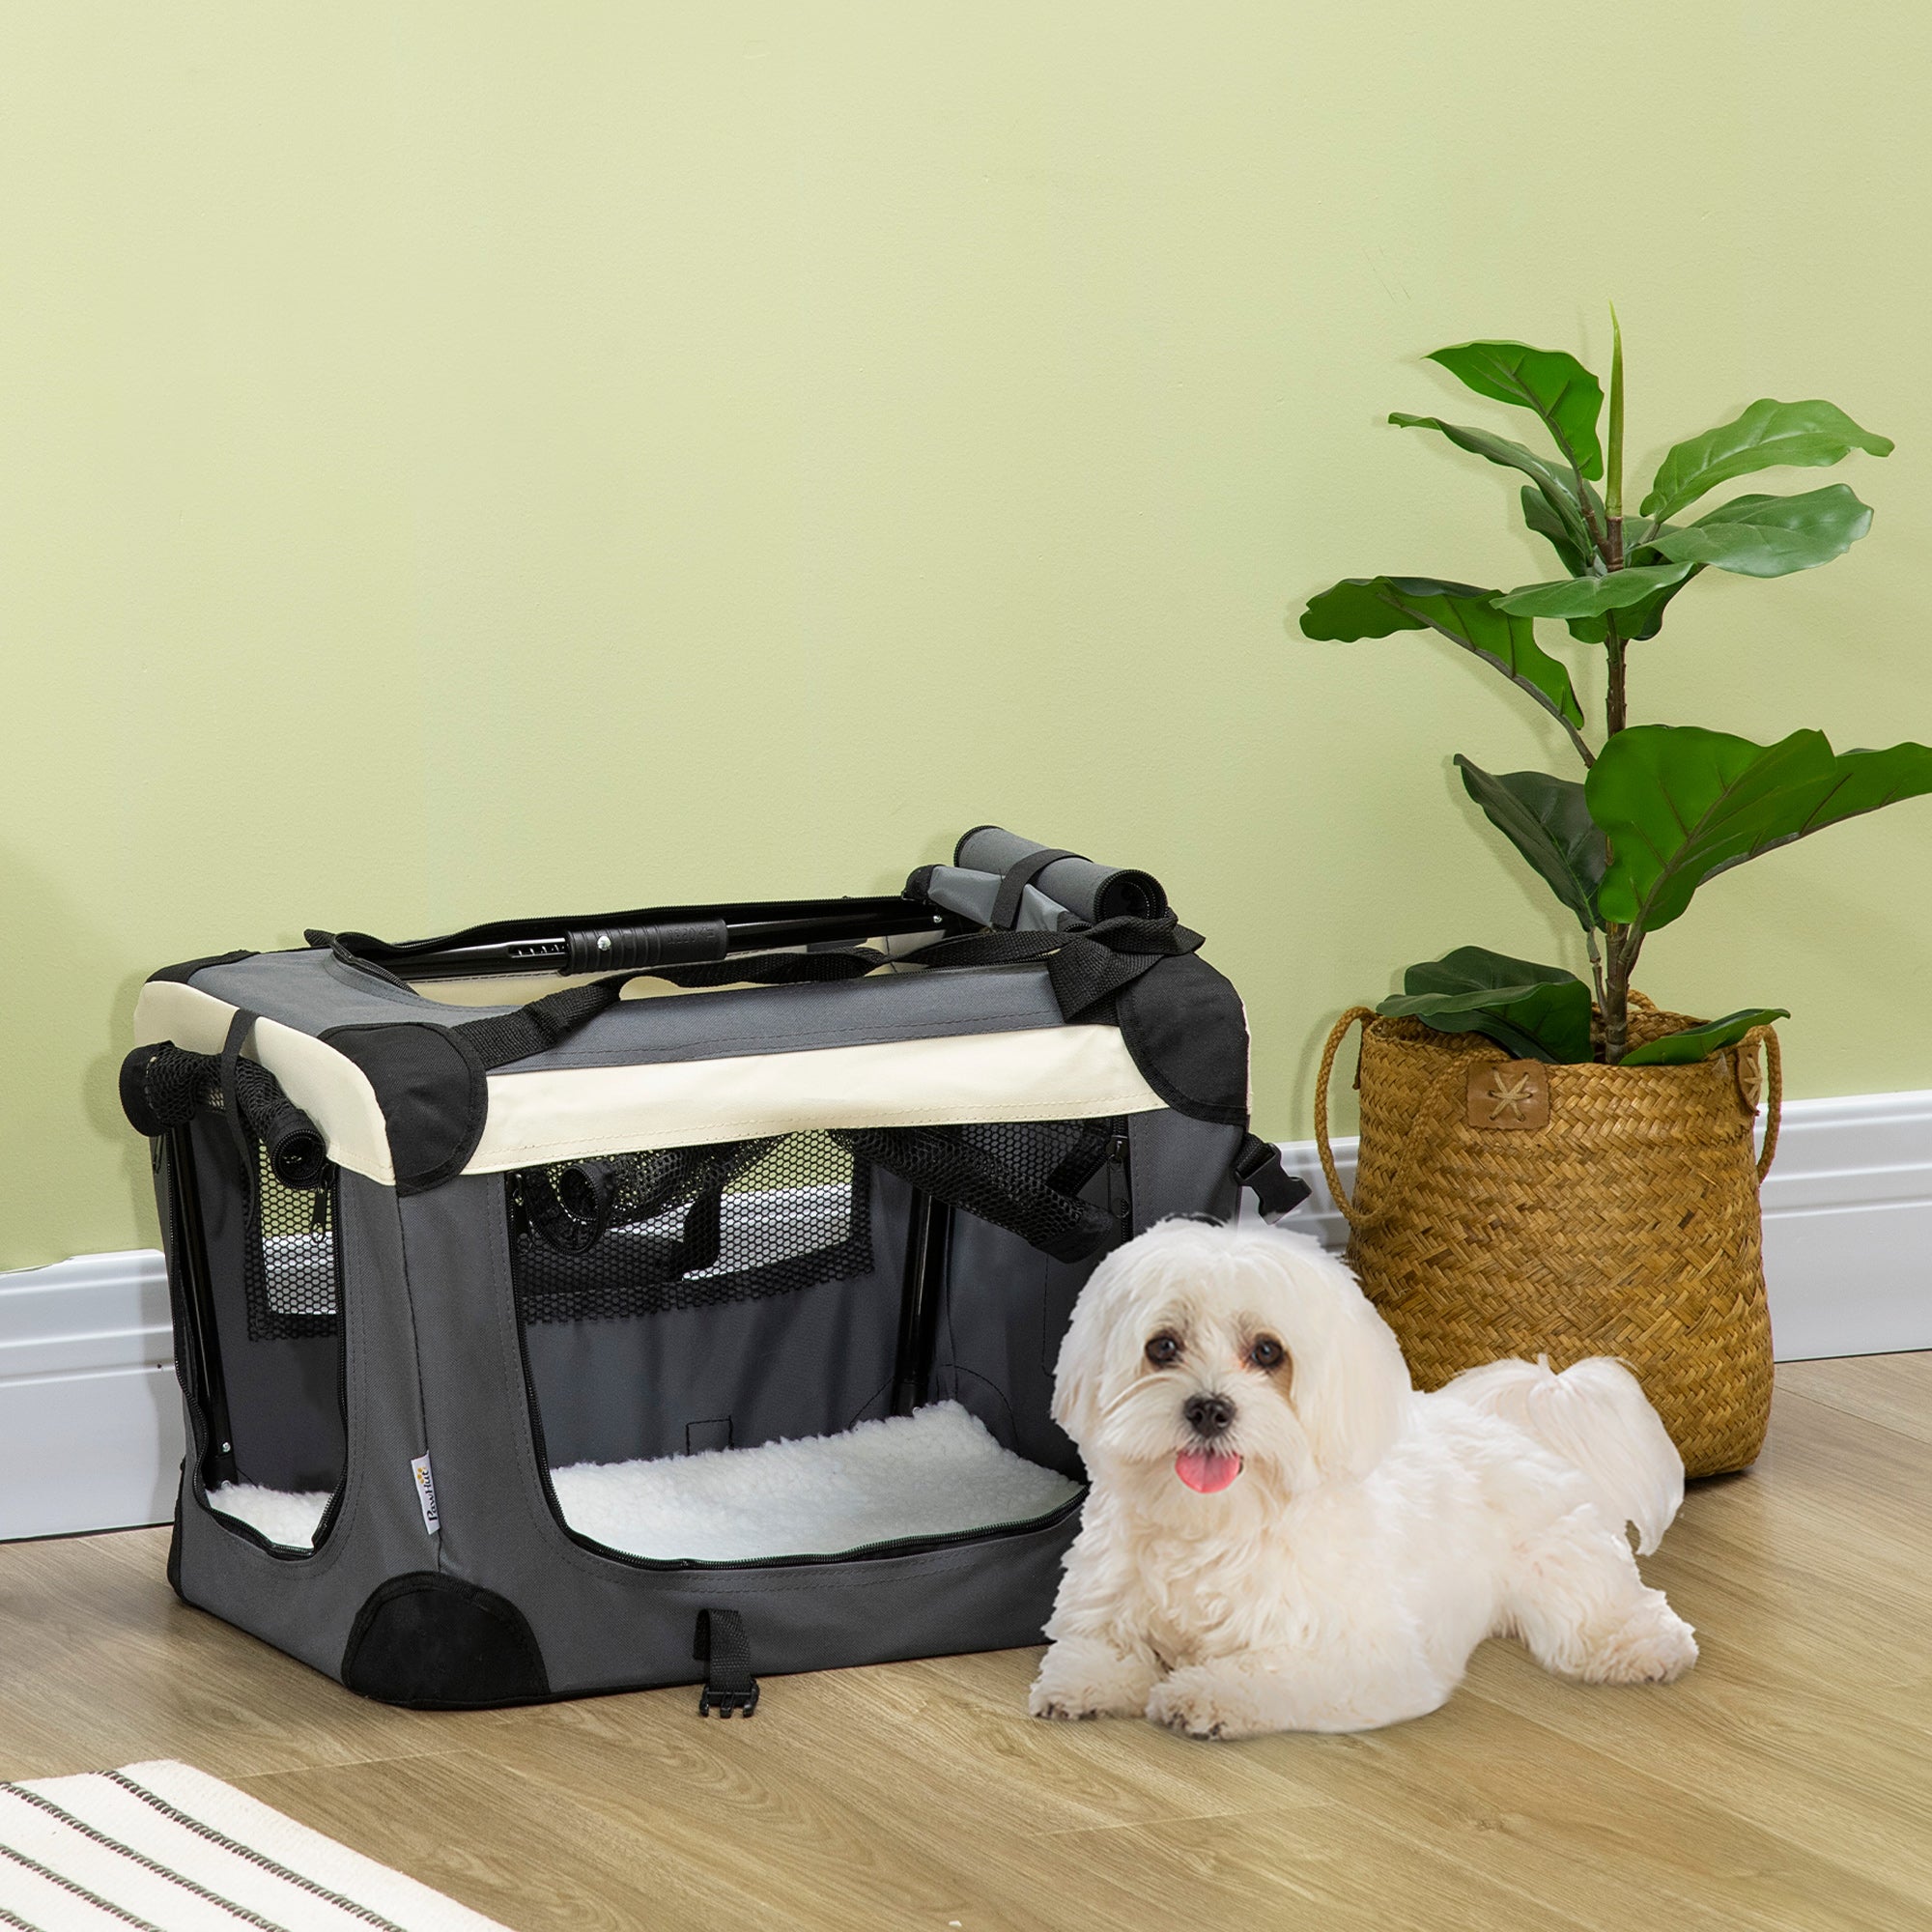 51cm Foldable Pet Carrier, Dog Cage, Portable Cat Carrier, Cat Bag, Pet Travel Bag with Cushion for Miniature Dogs, Grey-1